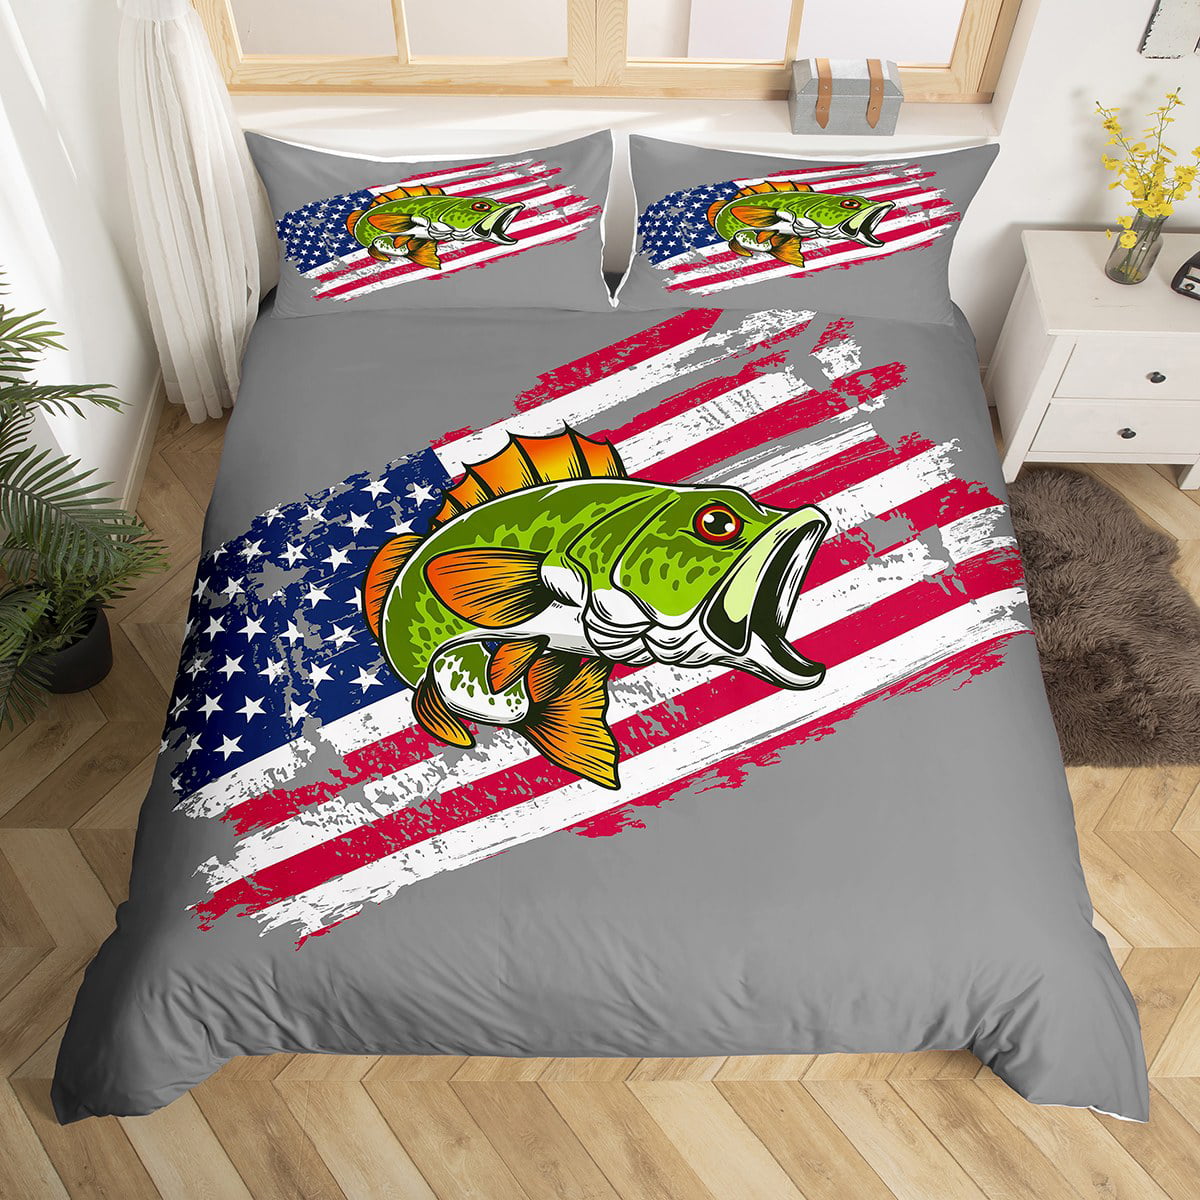 Fishing And Hunting Duvet Cover Camo American Flag Fishing Bedding Set  Queen For Teen Boys Men Fishermen,Rustic Big Bass Pike Fish Comforter  Cover,Farmhouse Cabin Quilt Cover With 2 Pillow Cases 